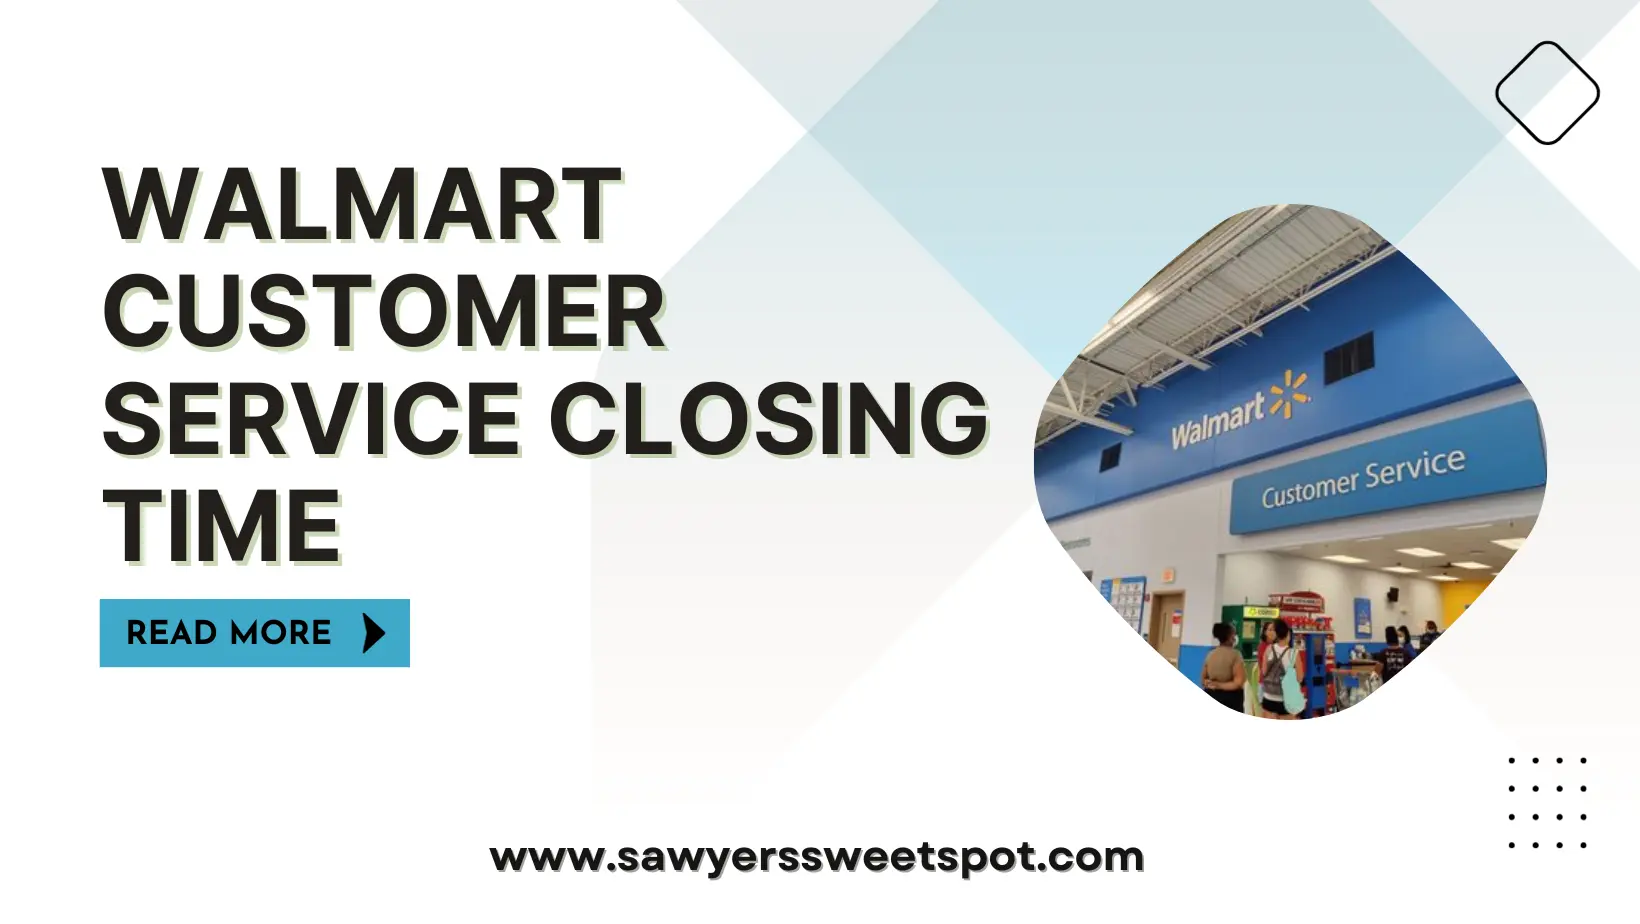 At What Time Does Walmart Customer Service Close?